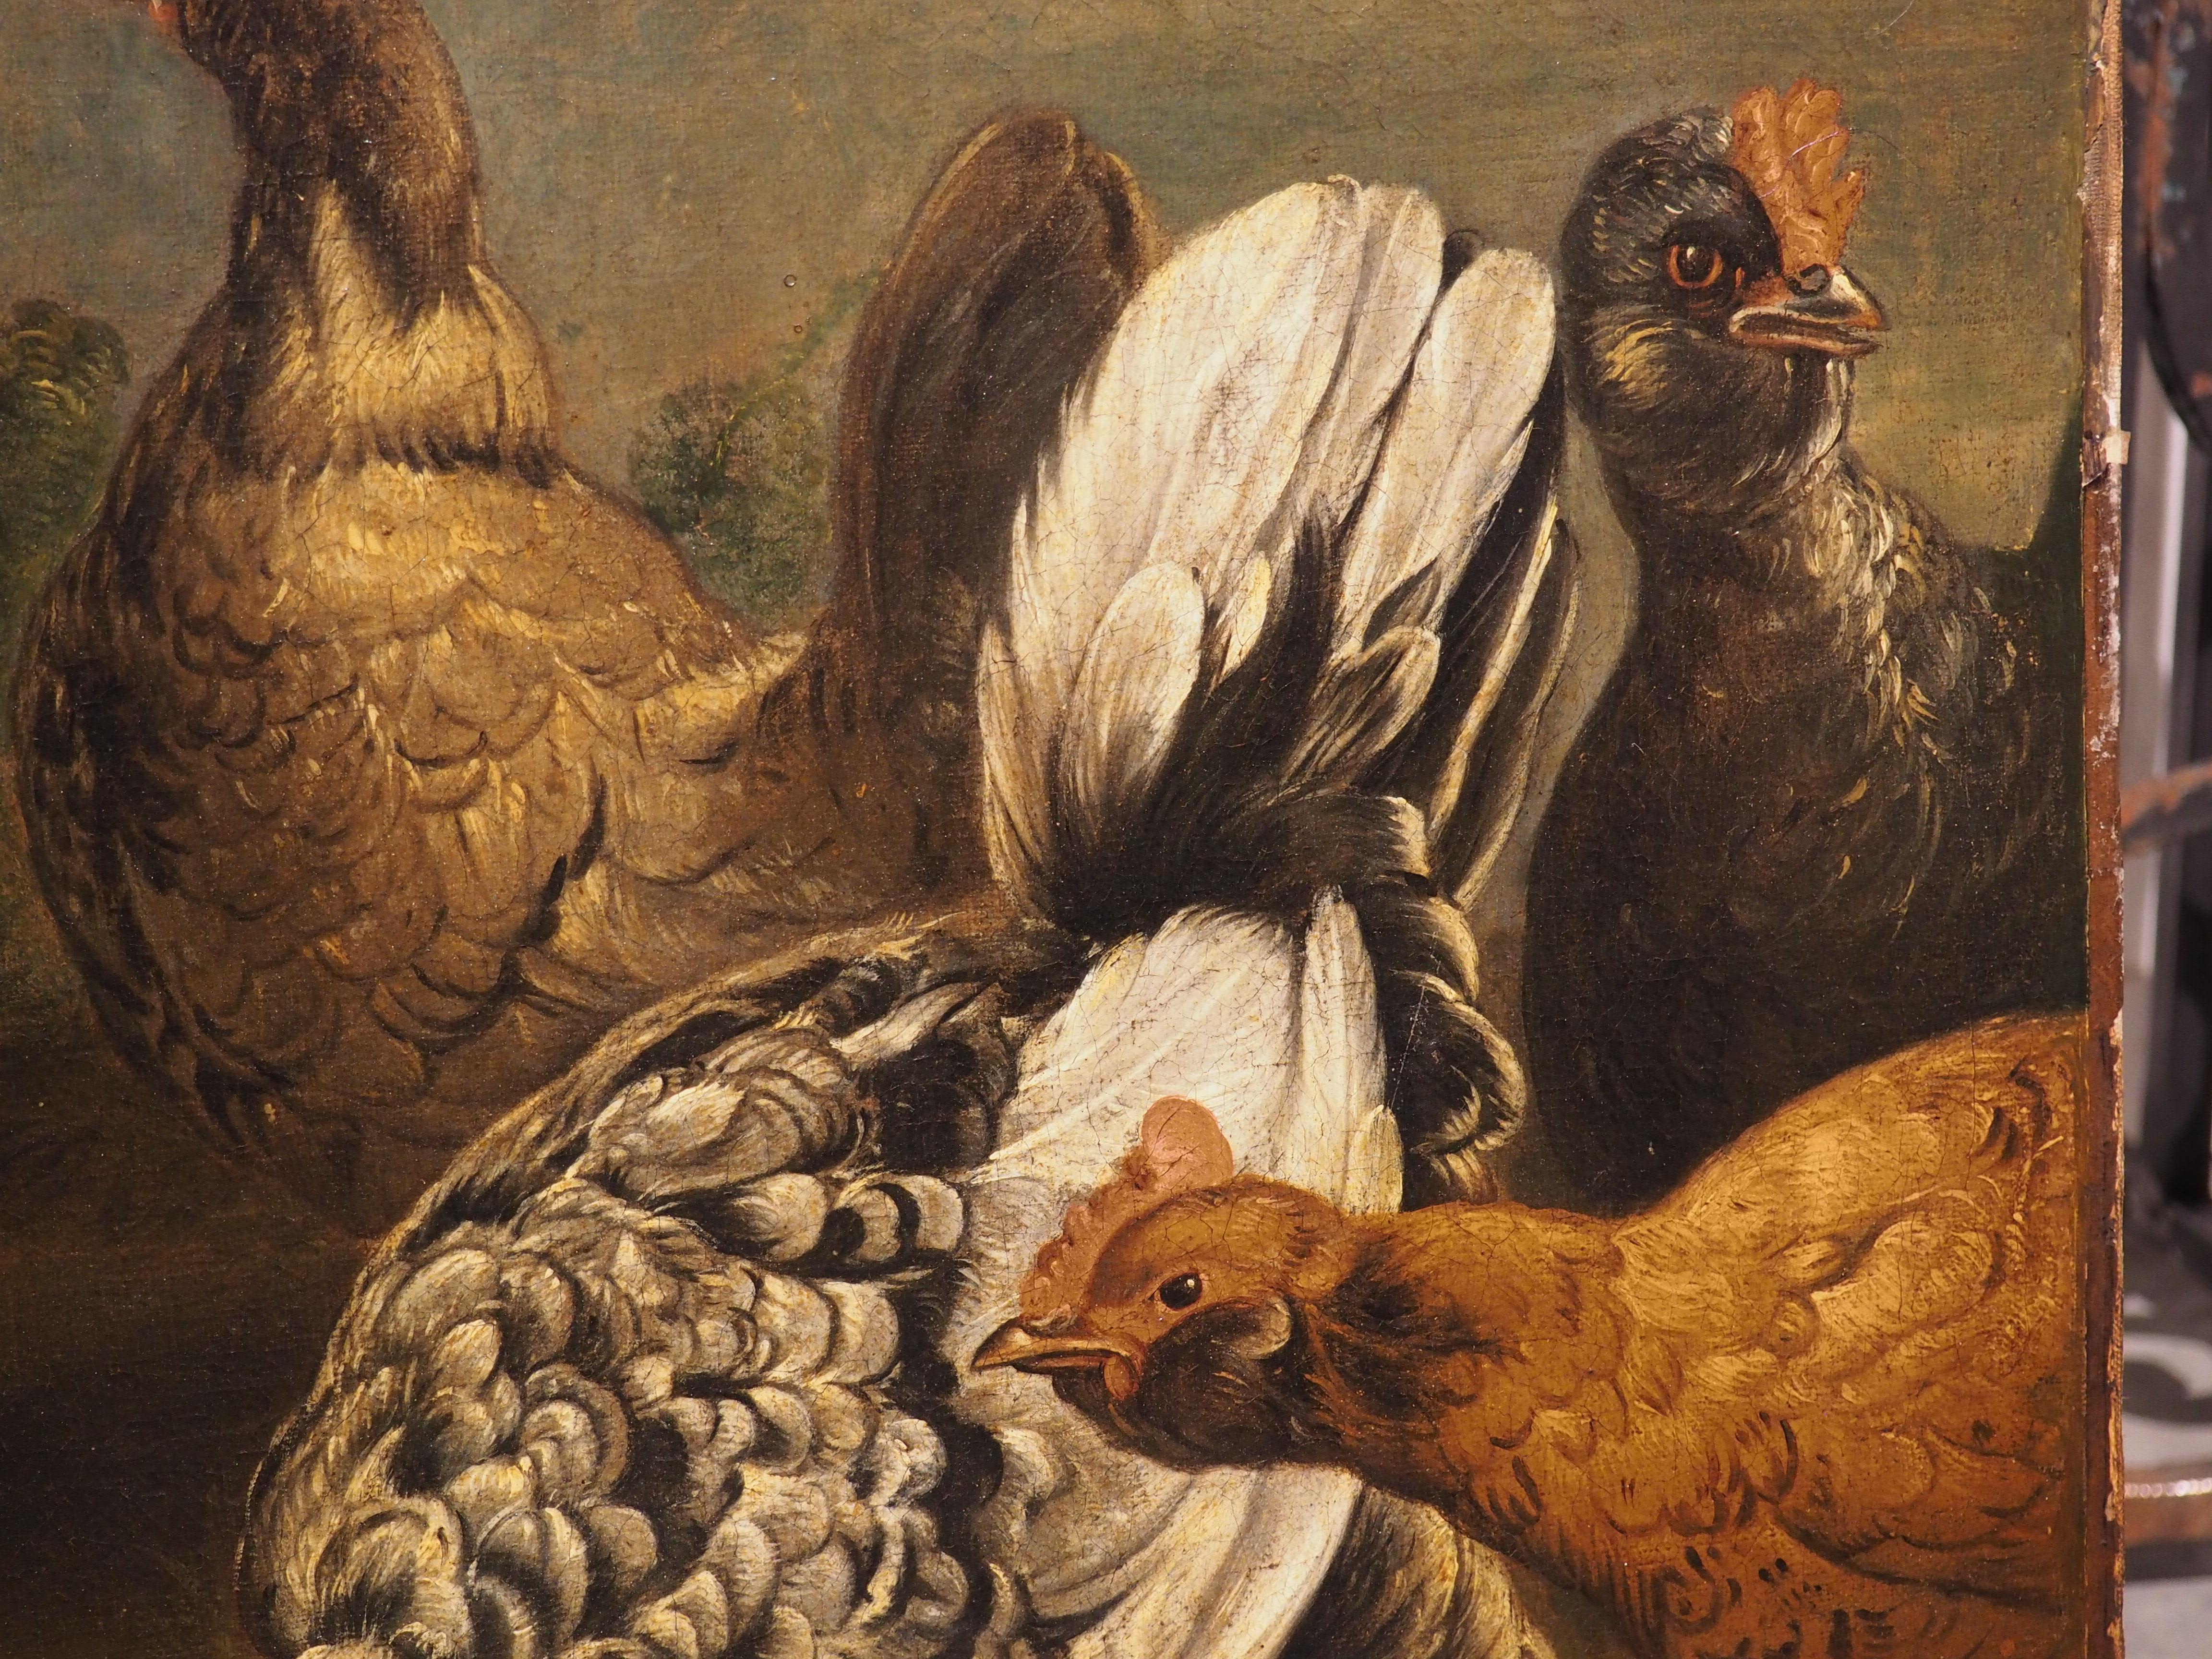 Canvas 17th C. Dutch Painting of a Flock of Chickens, Attrib. to Melchior Hondecoeter